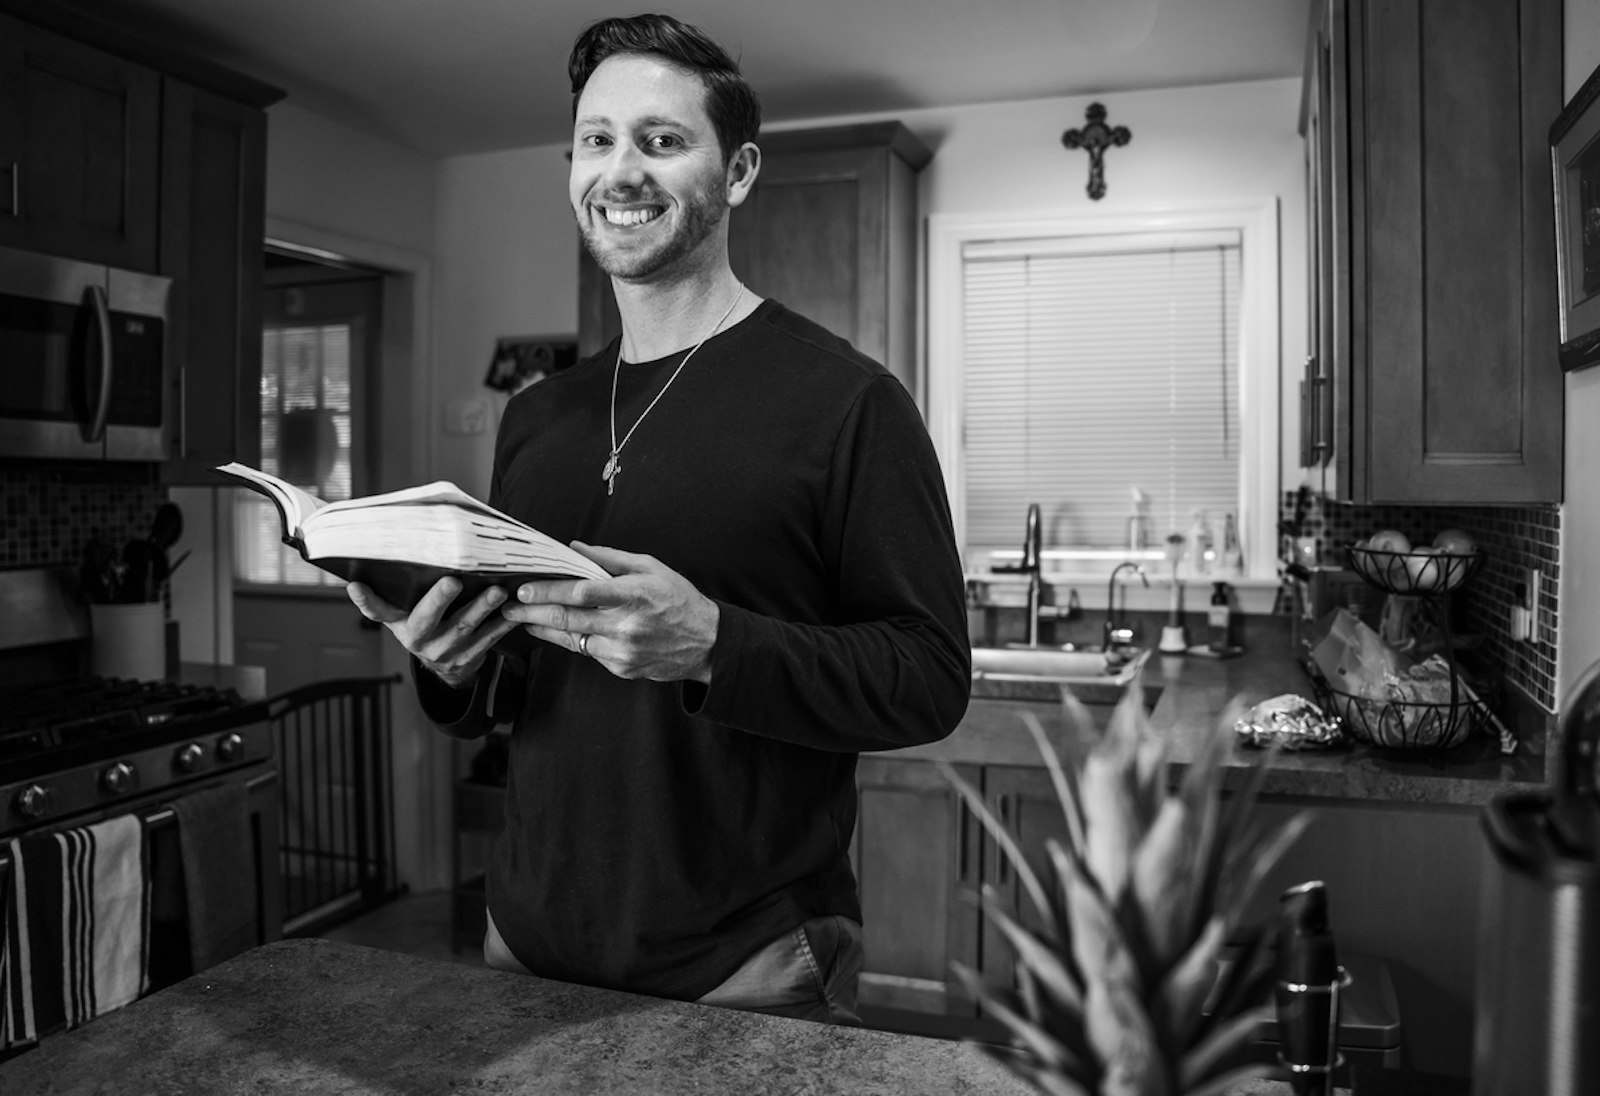 Jordan Beachnau smiles in his home while holding the Bible during a photo shoot. Beachnau was one of hundreds who shared his story of Eucharistic devotion via the I AM HERE campaign.